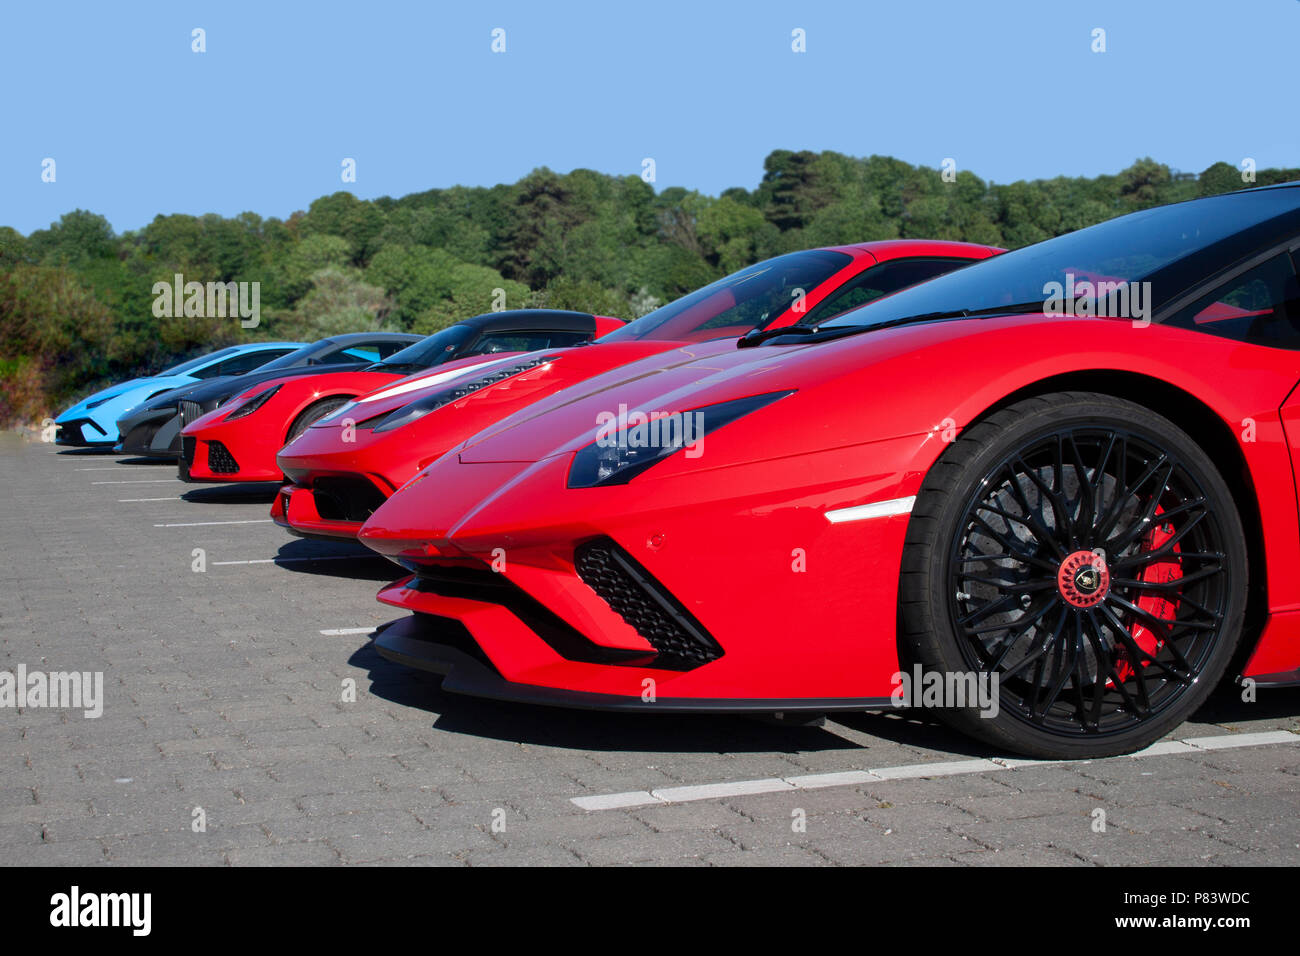 Supercars parked in the sun Stock Photo